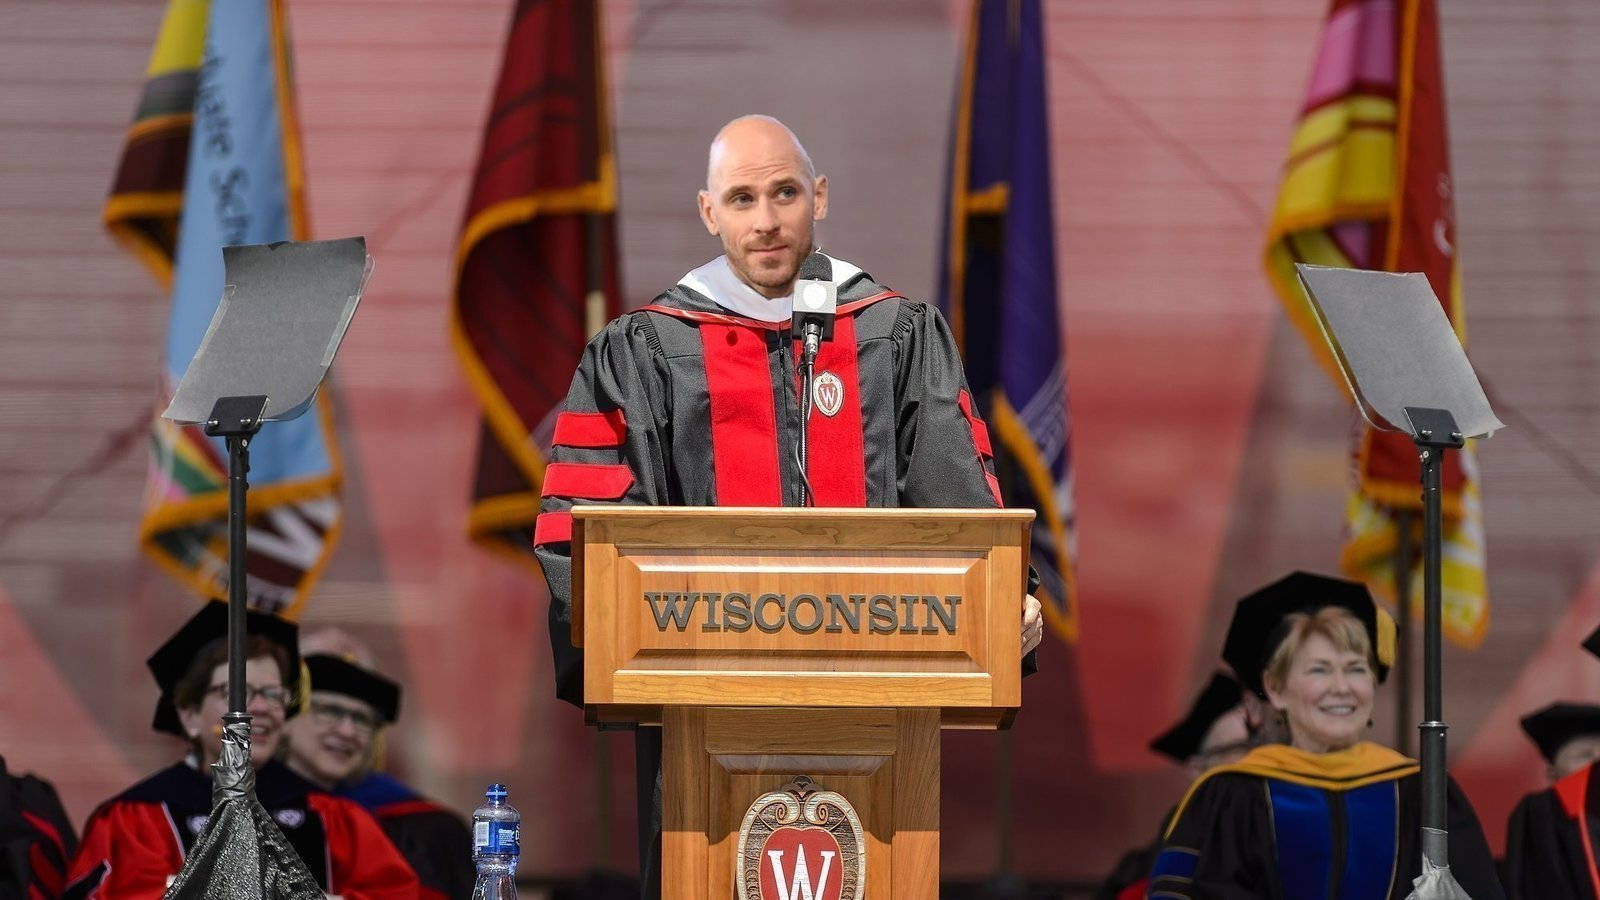 Youtube Star Johnny Sins Delivering Commencement Speech